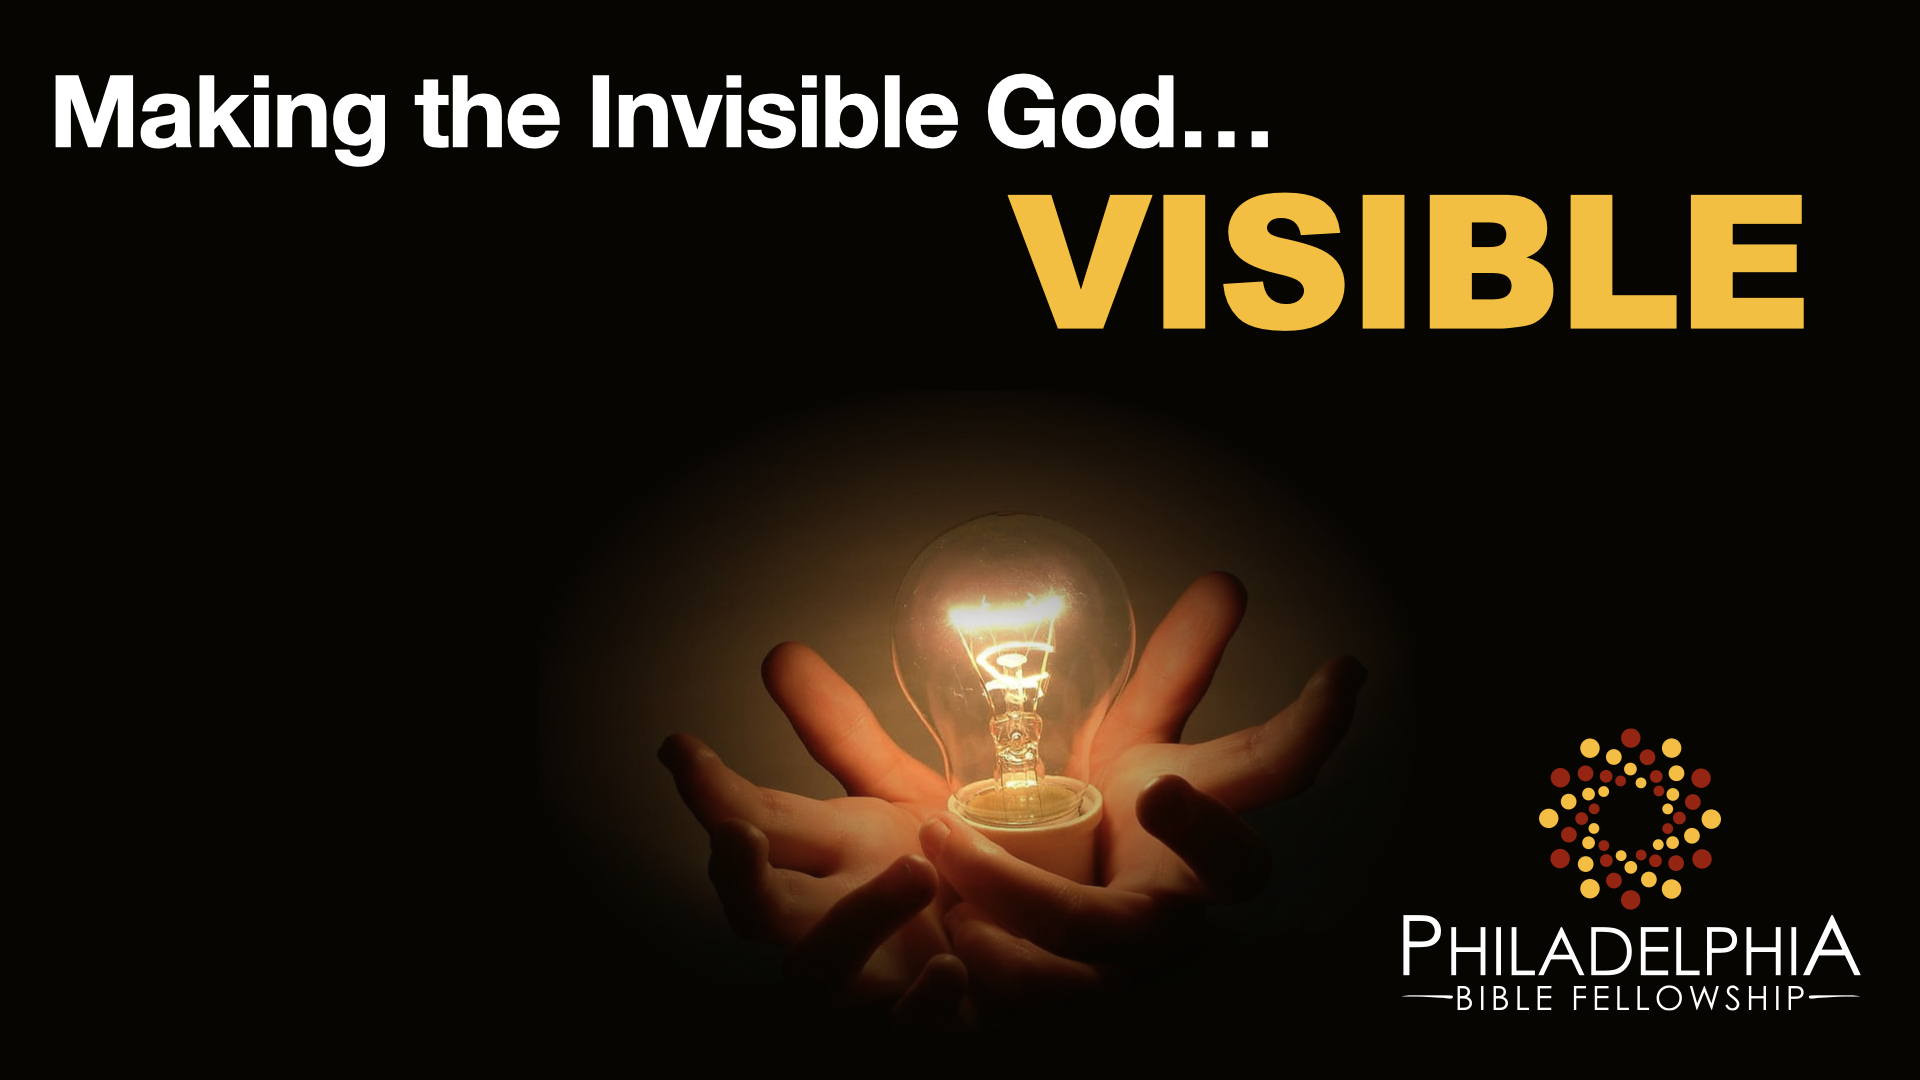 Making the Invisible God Visible